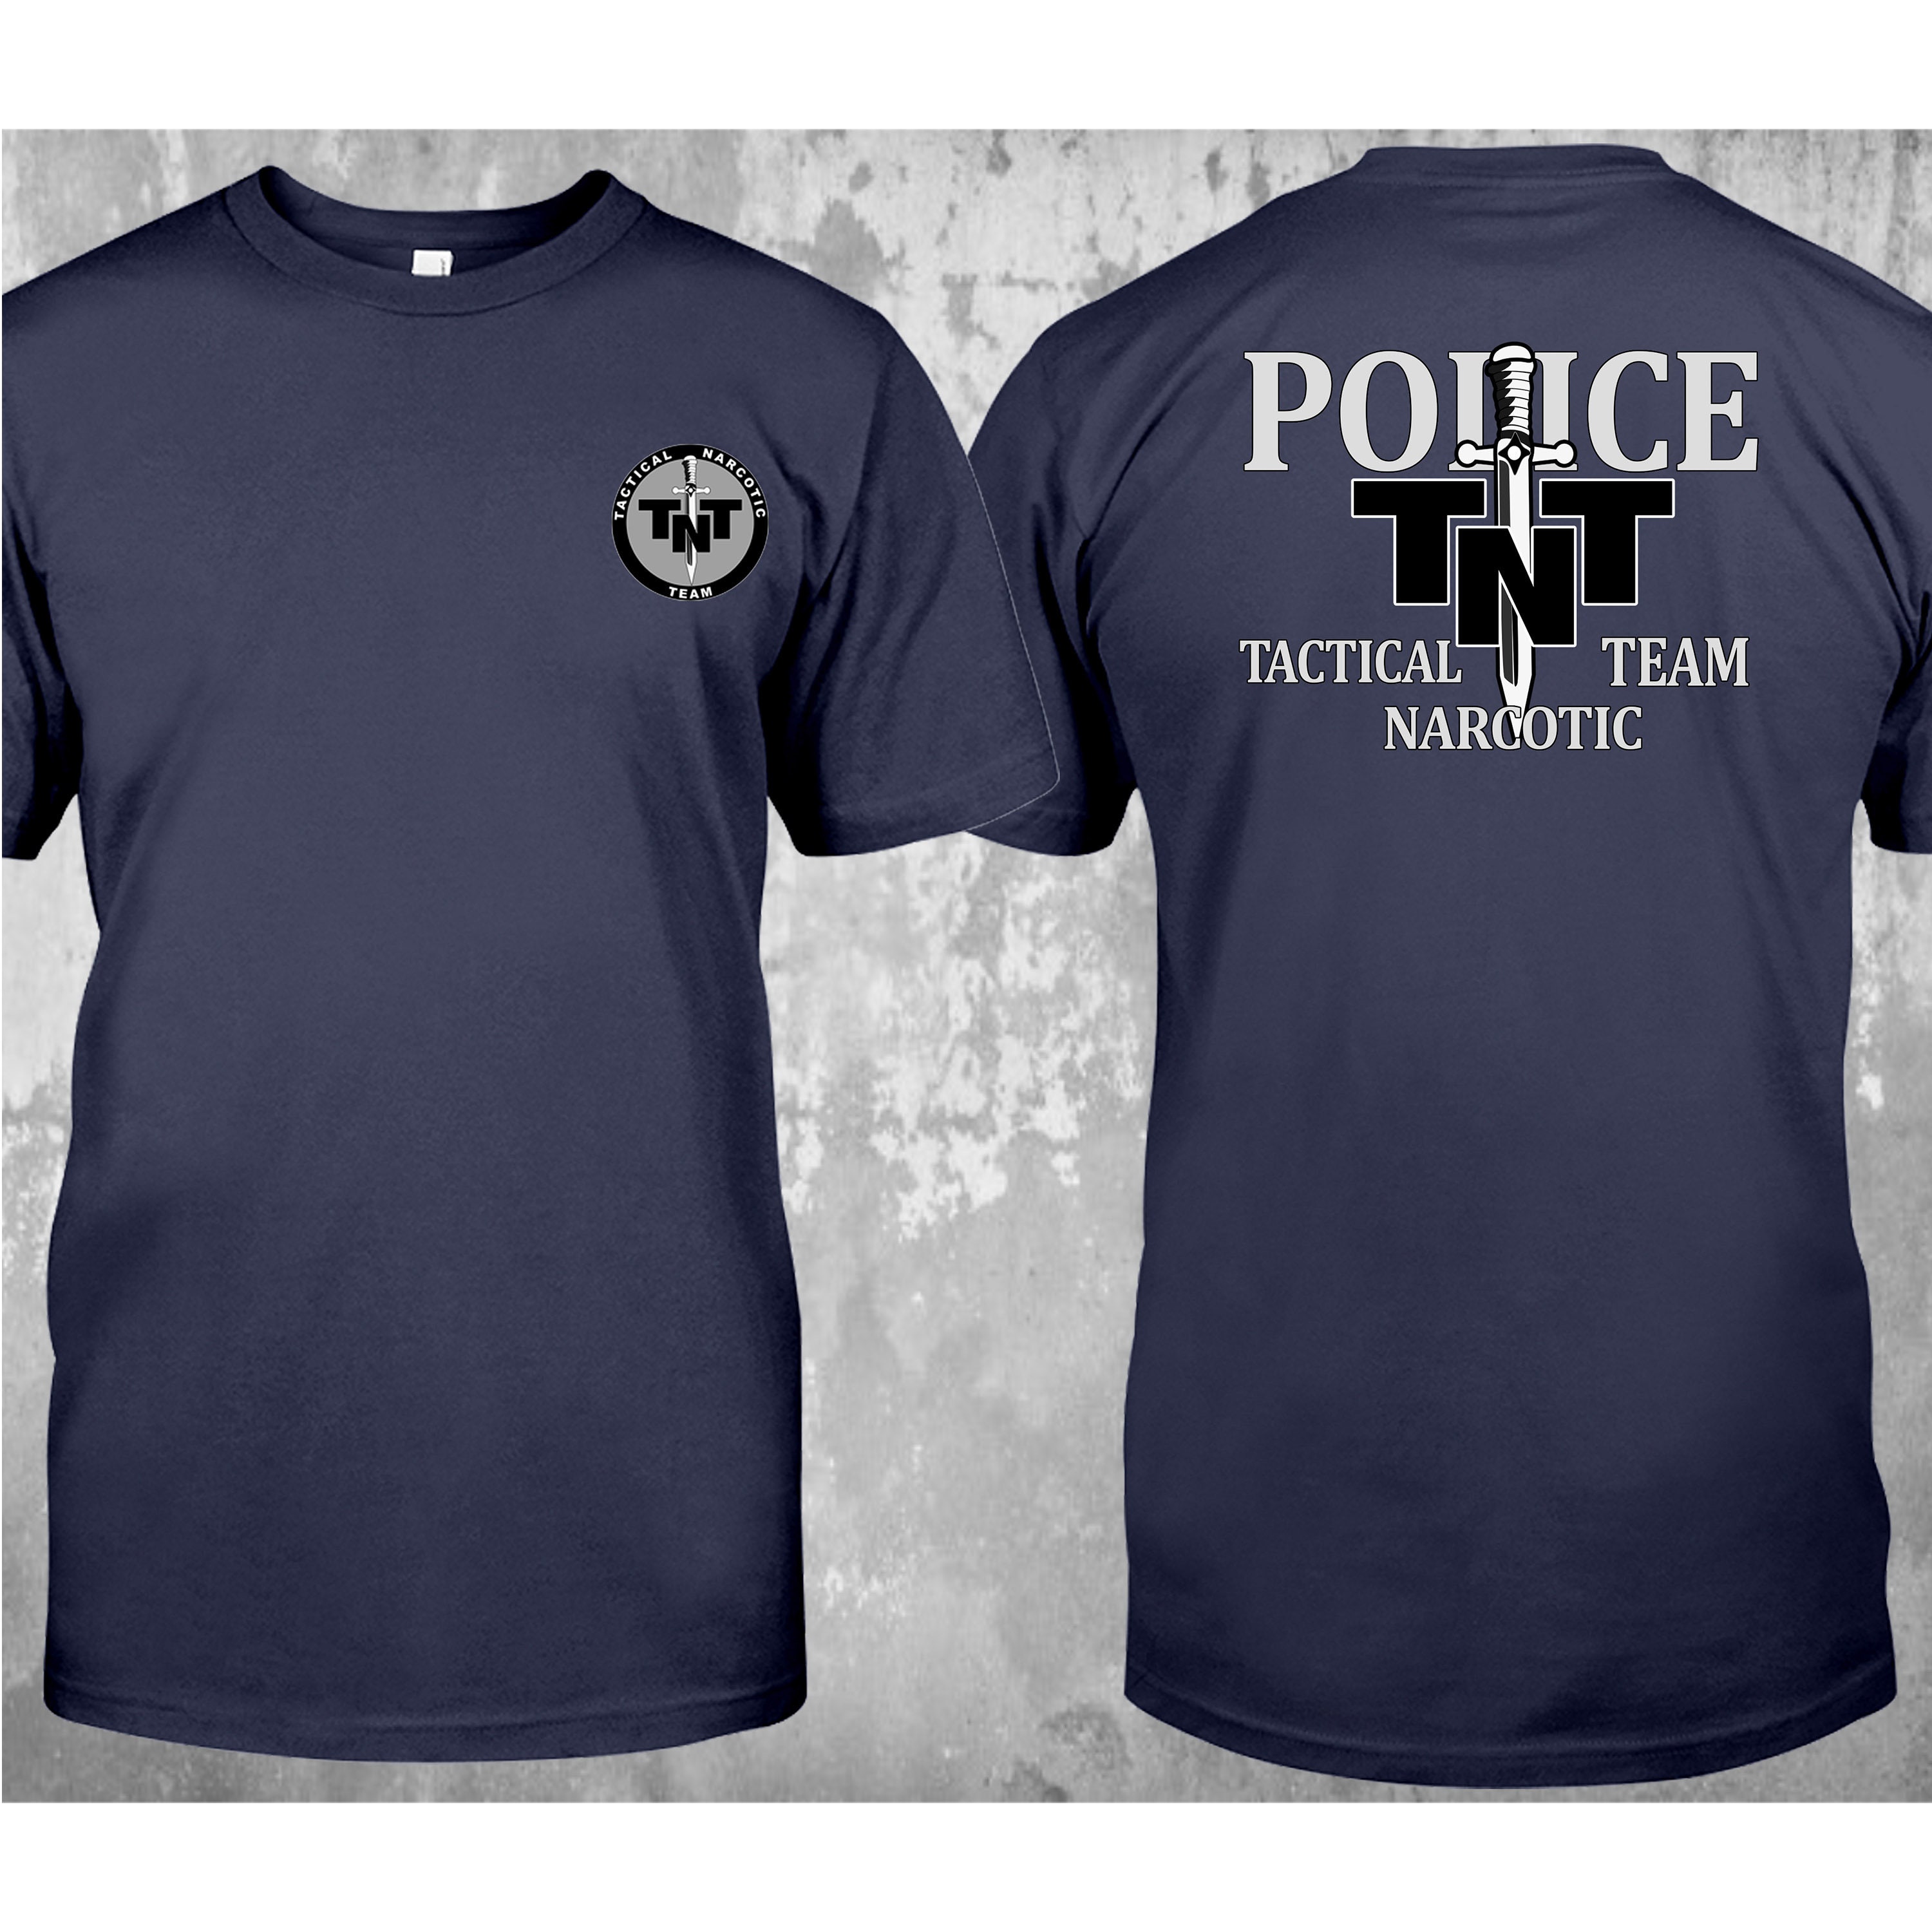 TruBlu Tactical Police Supply - 💙New TruBlu Tactical Shirts in stock💙